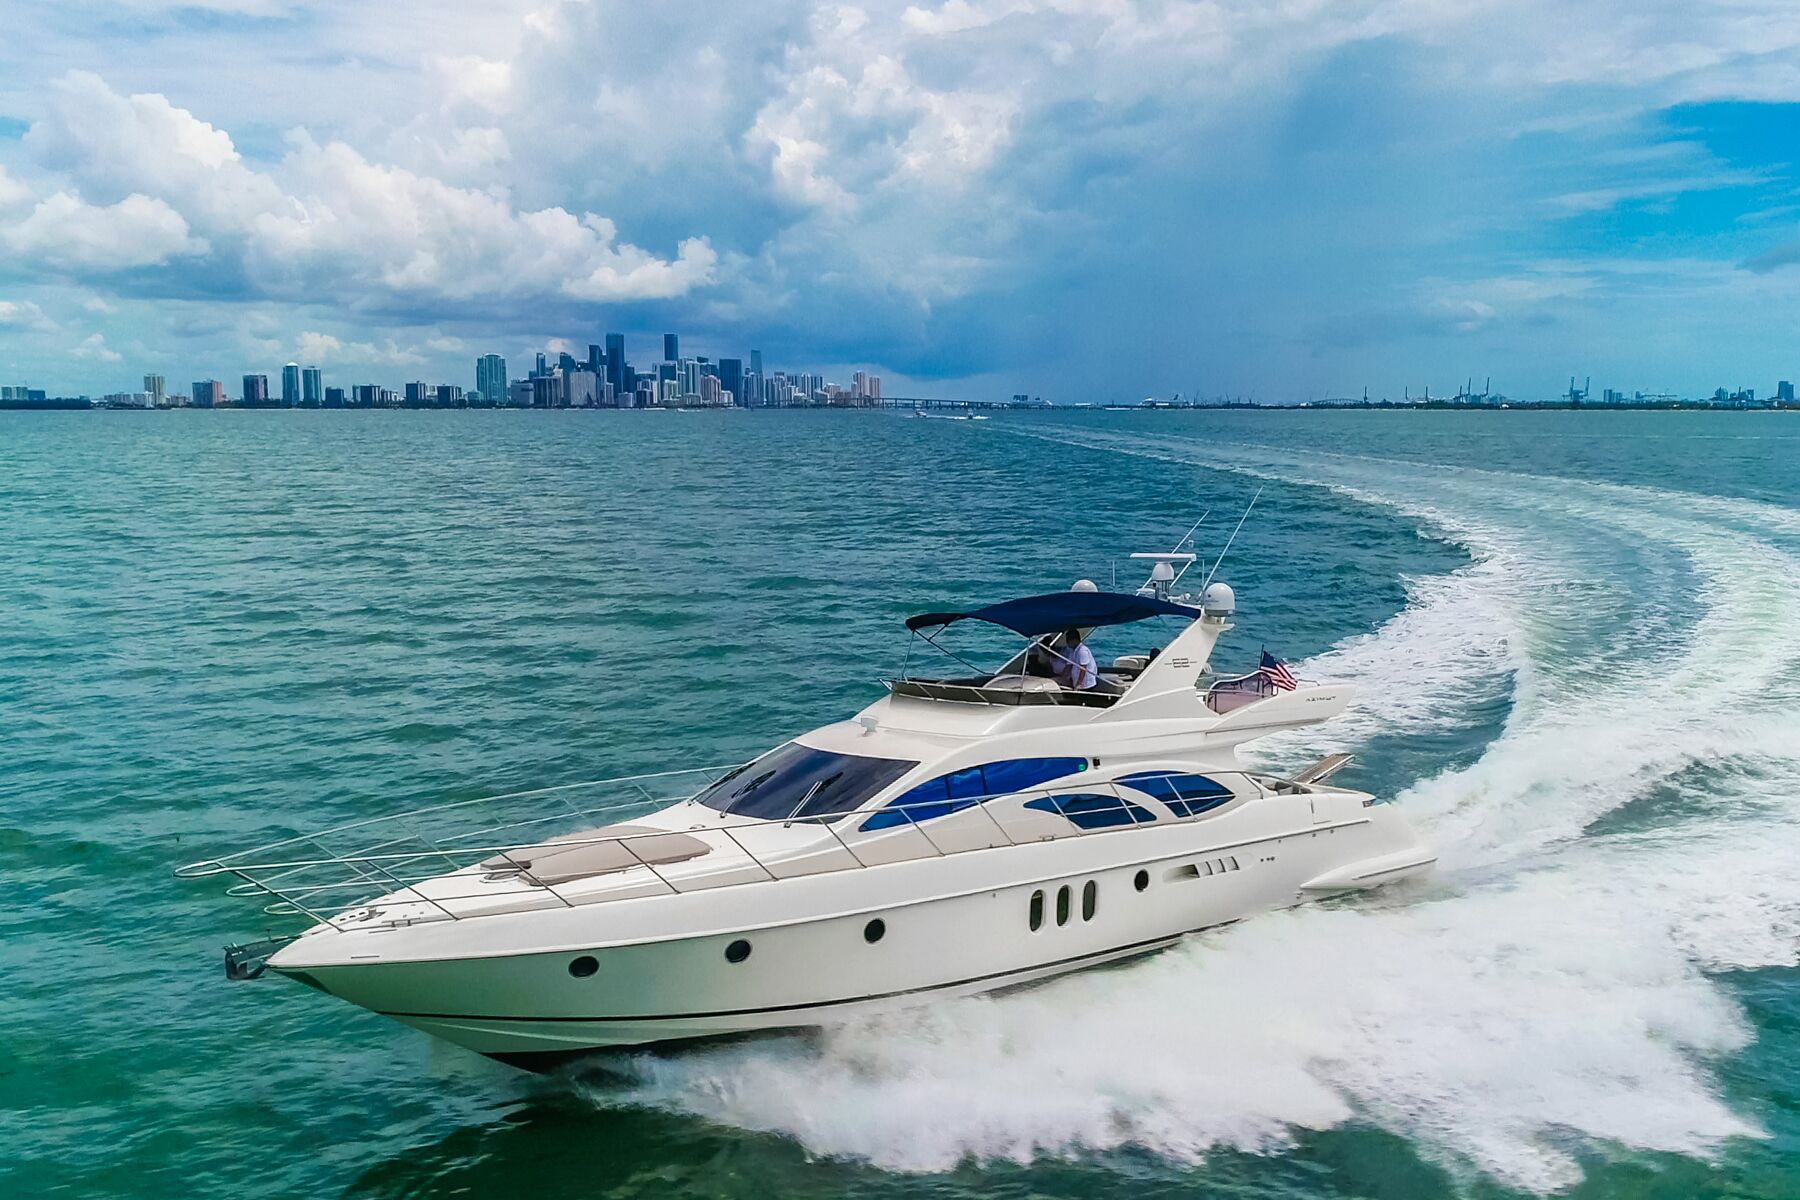 Prime Yacht Rentals Miami - The perfect yacht for your next adventure, presenting the Azimut 62”